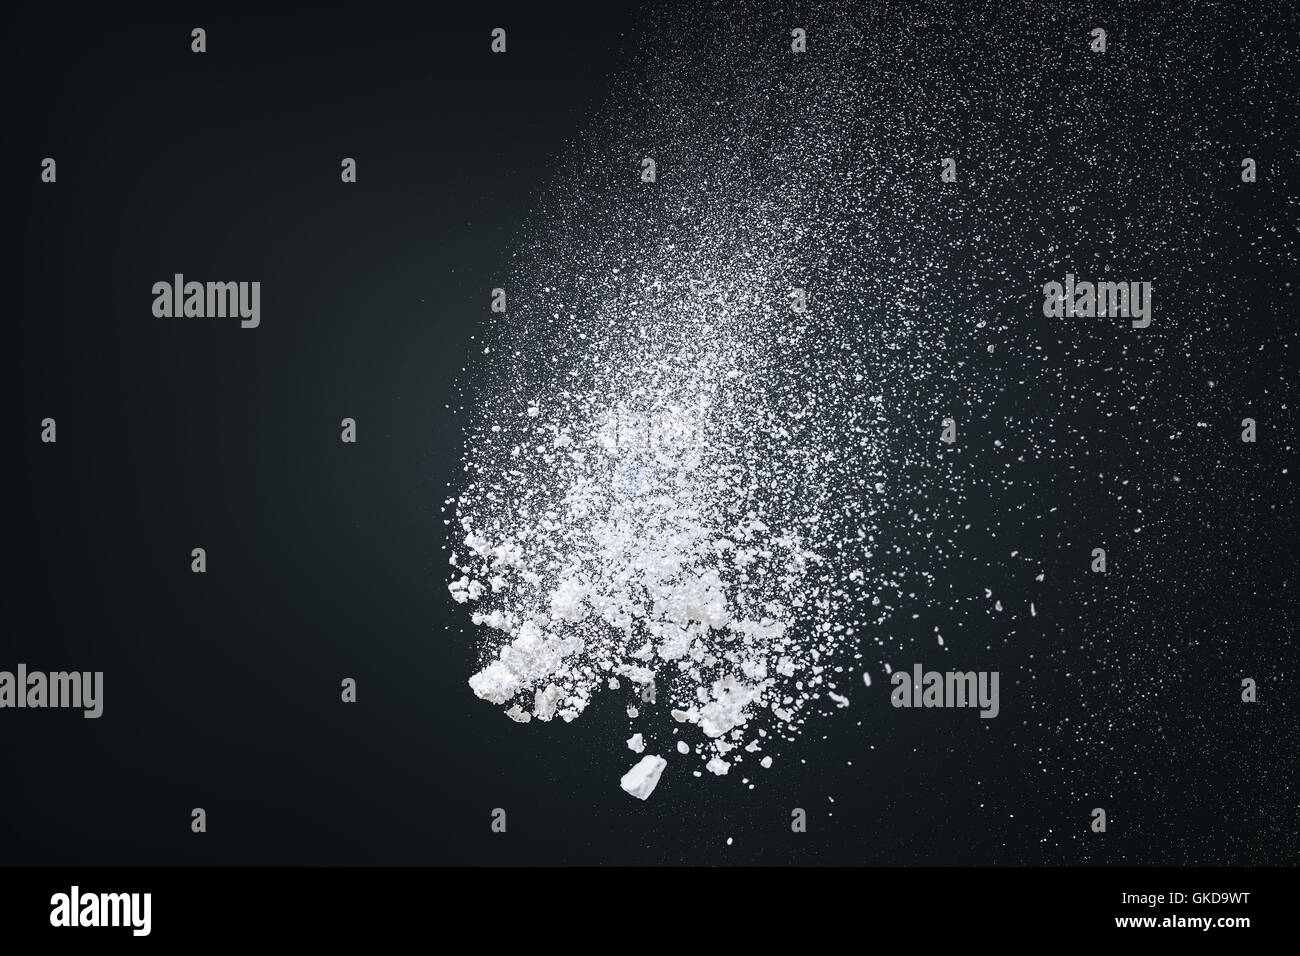 Abstract design of powder cloud texture explode over dark background Stock Photo